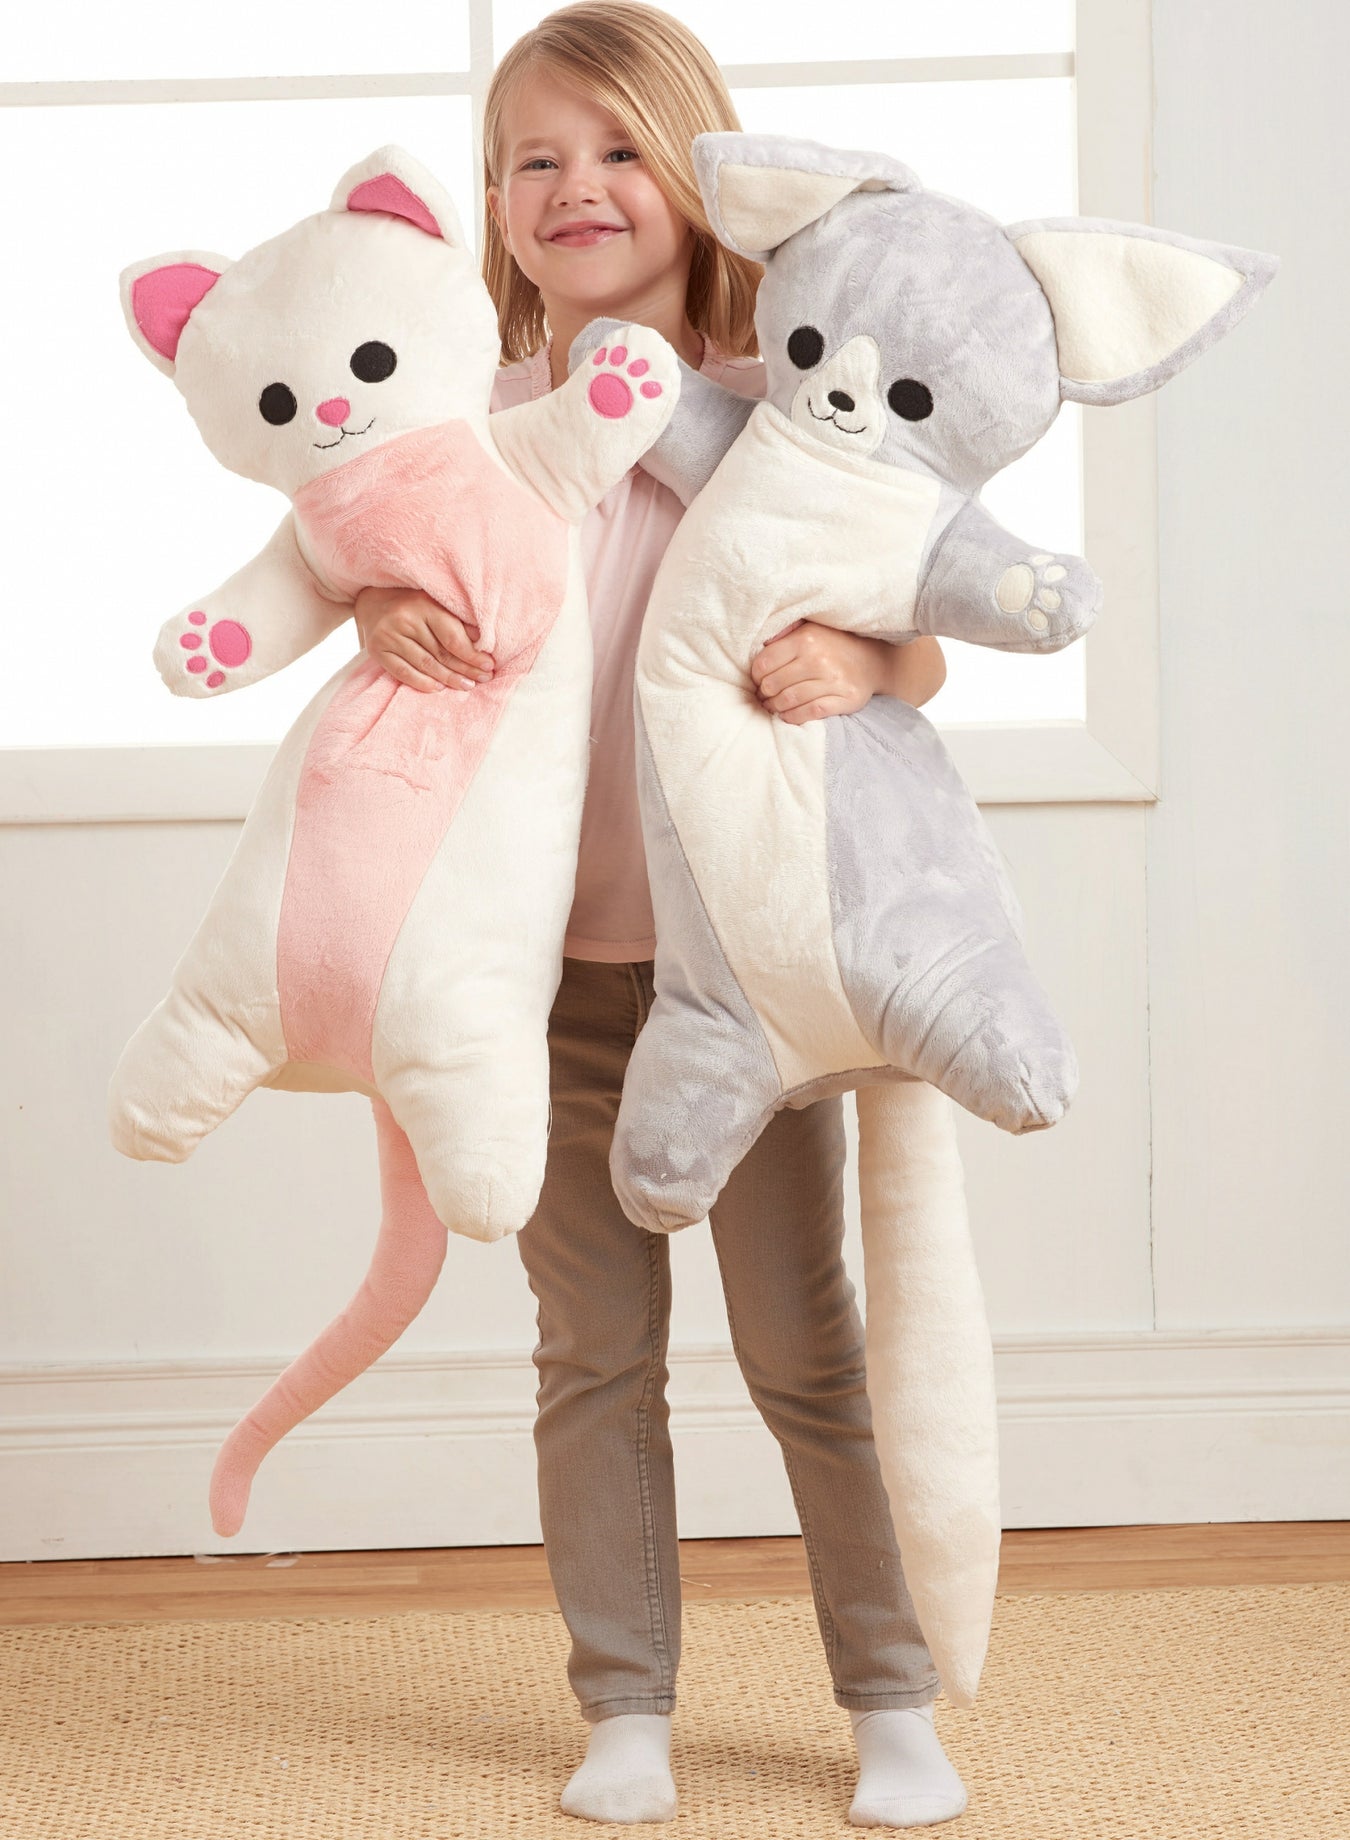 Sewing patterns for toys and for dolls clothes available from Jaycotts